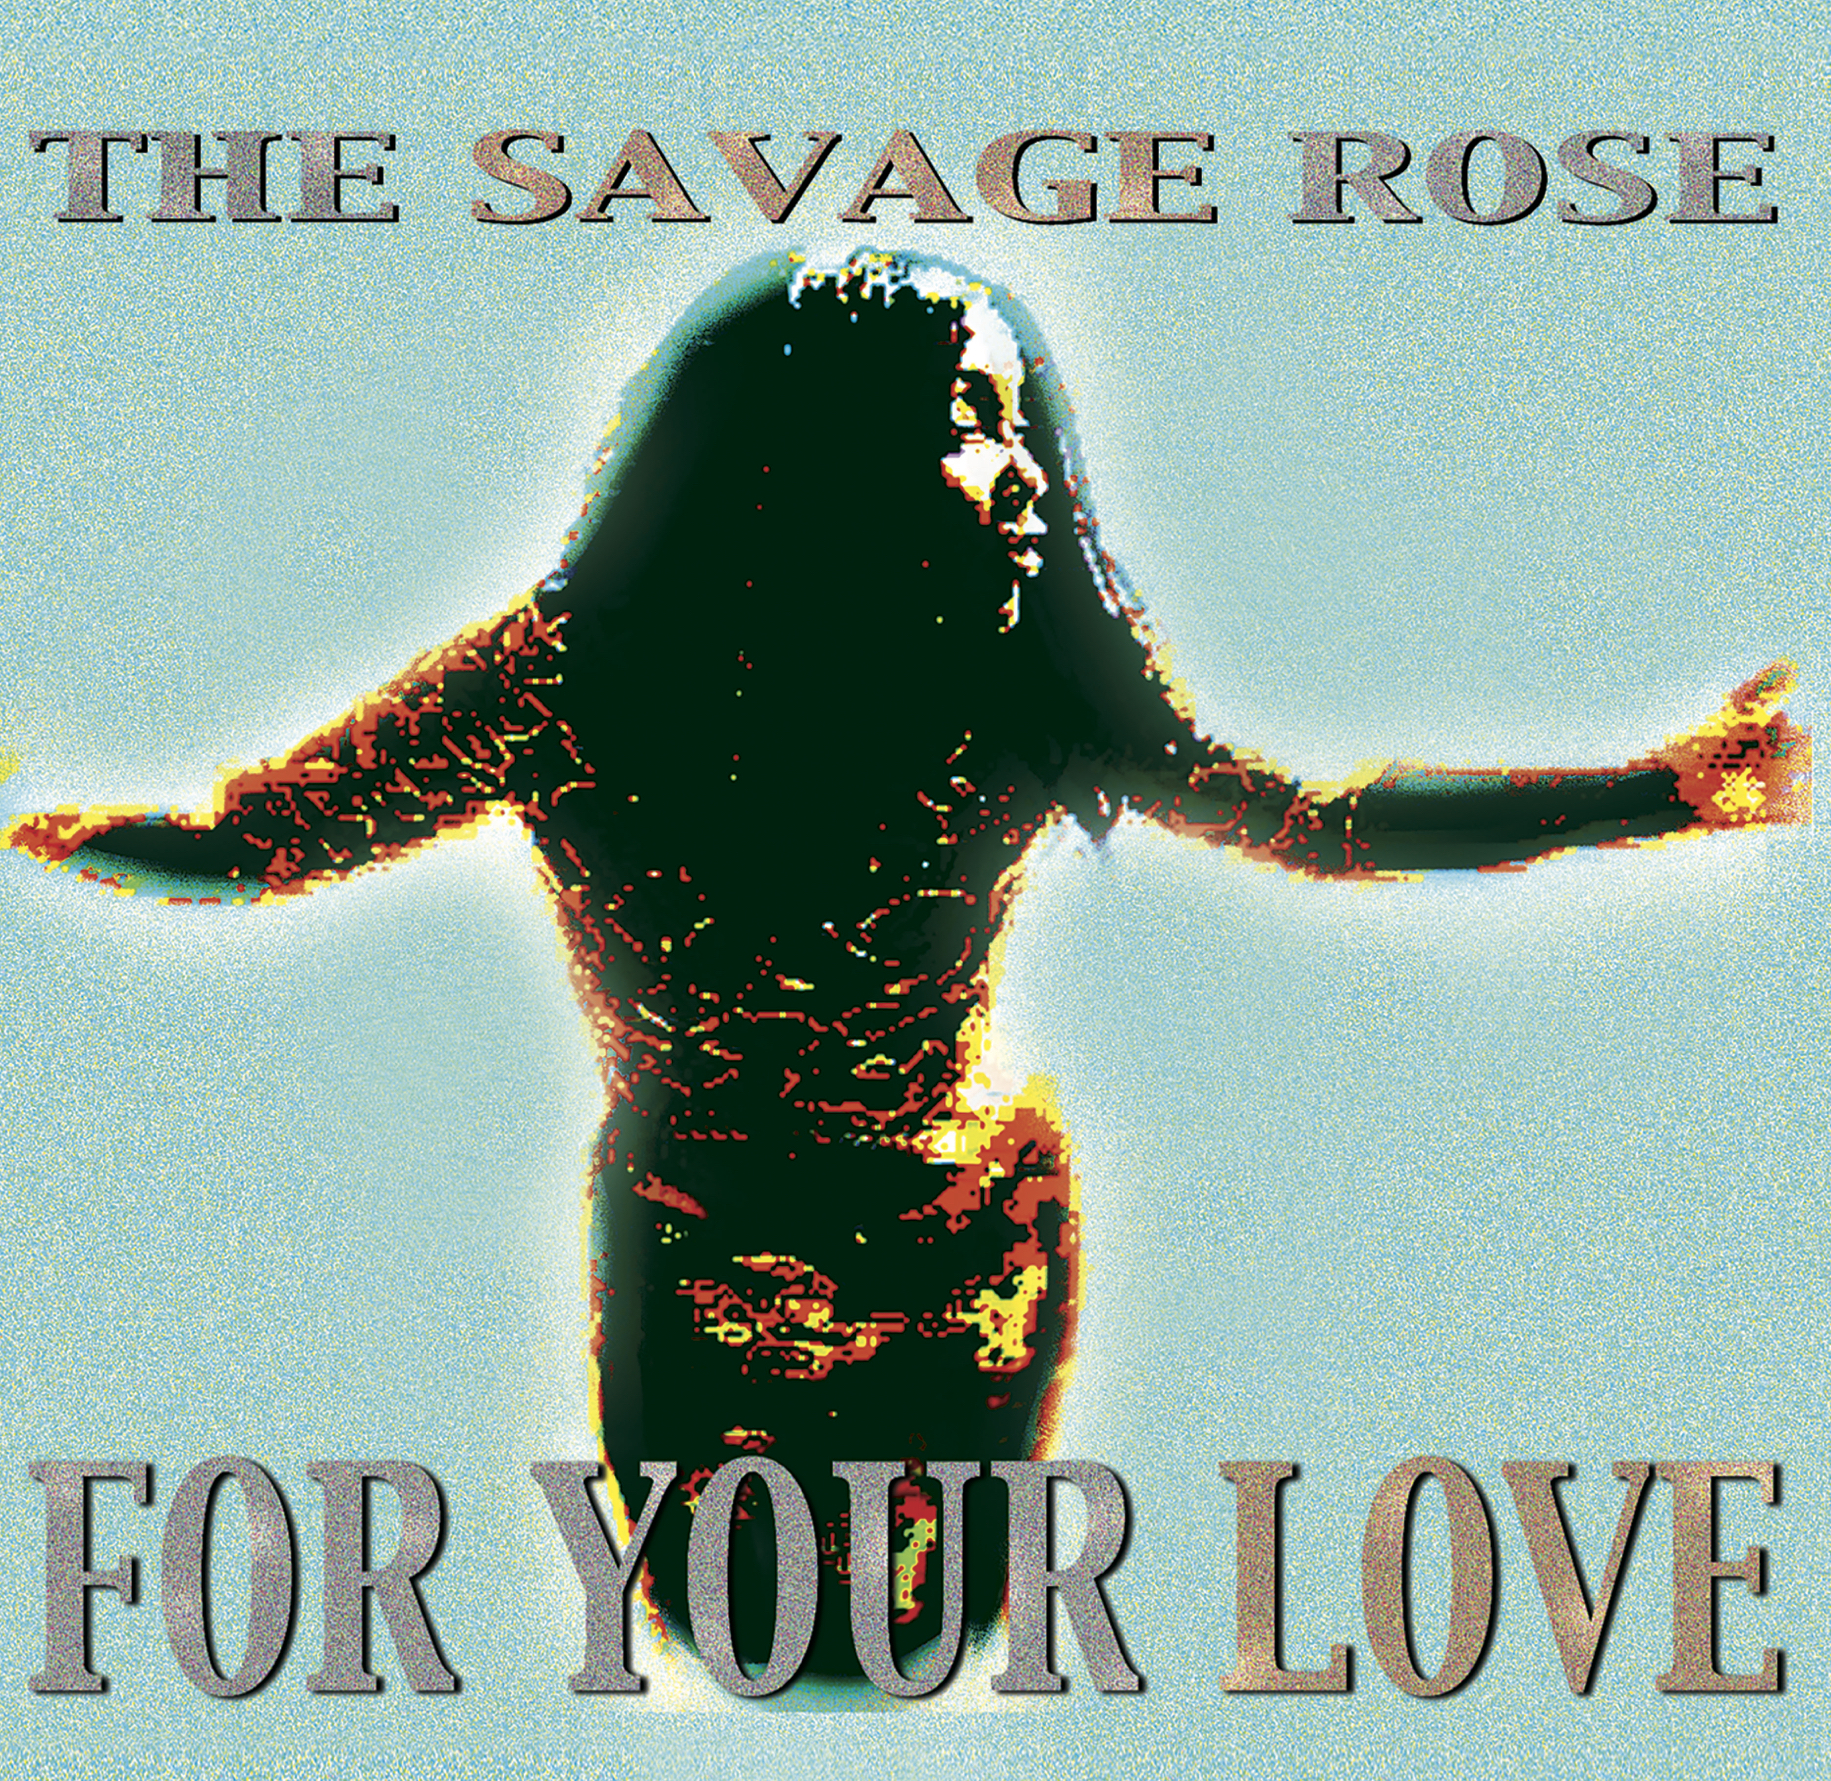 The Savage Rose - For Your Love (Reissue)